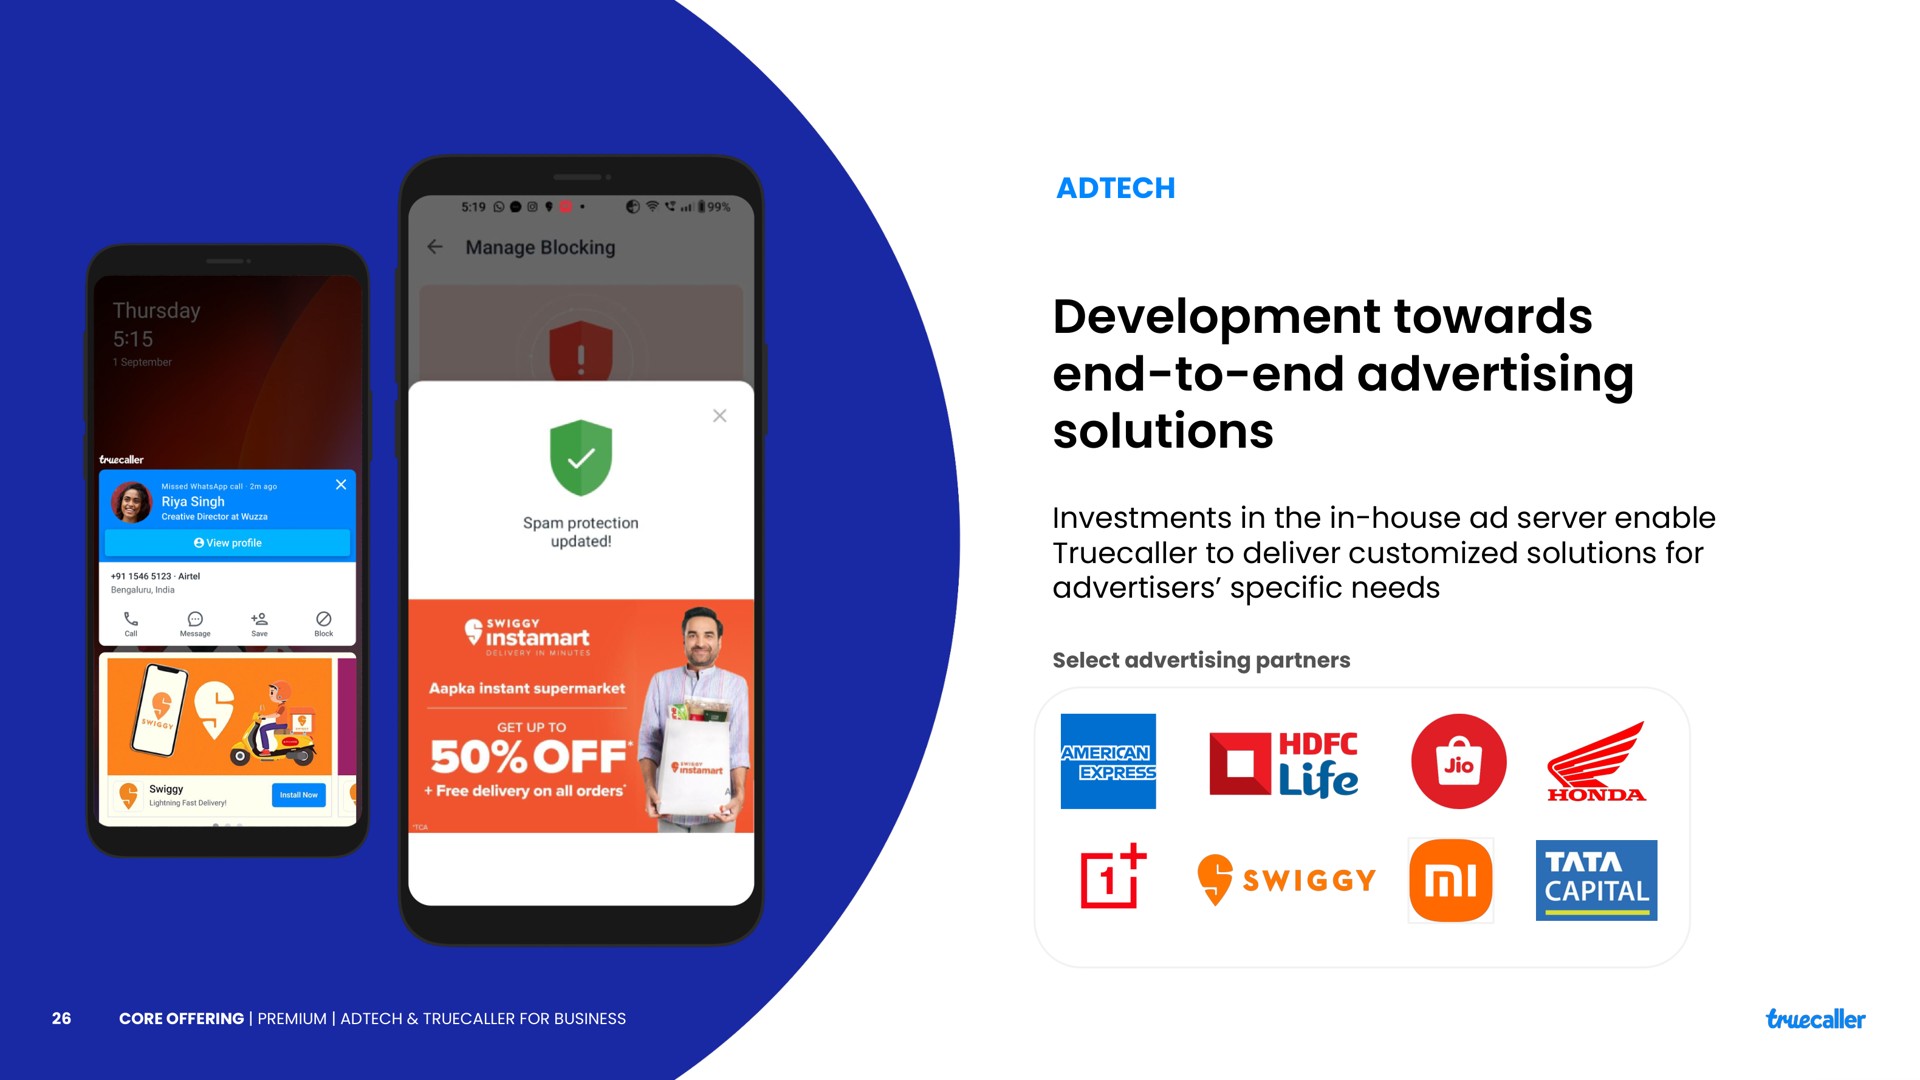 development towards end to end advertising solutions investments in the in house server enable to deliver solutions for advertisers specific needs select advertising partners | Truecaller